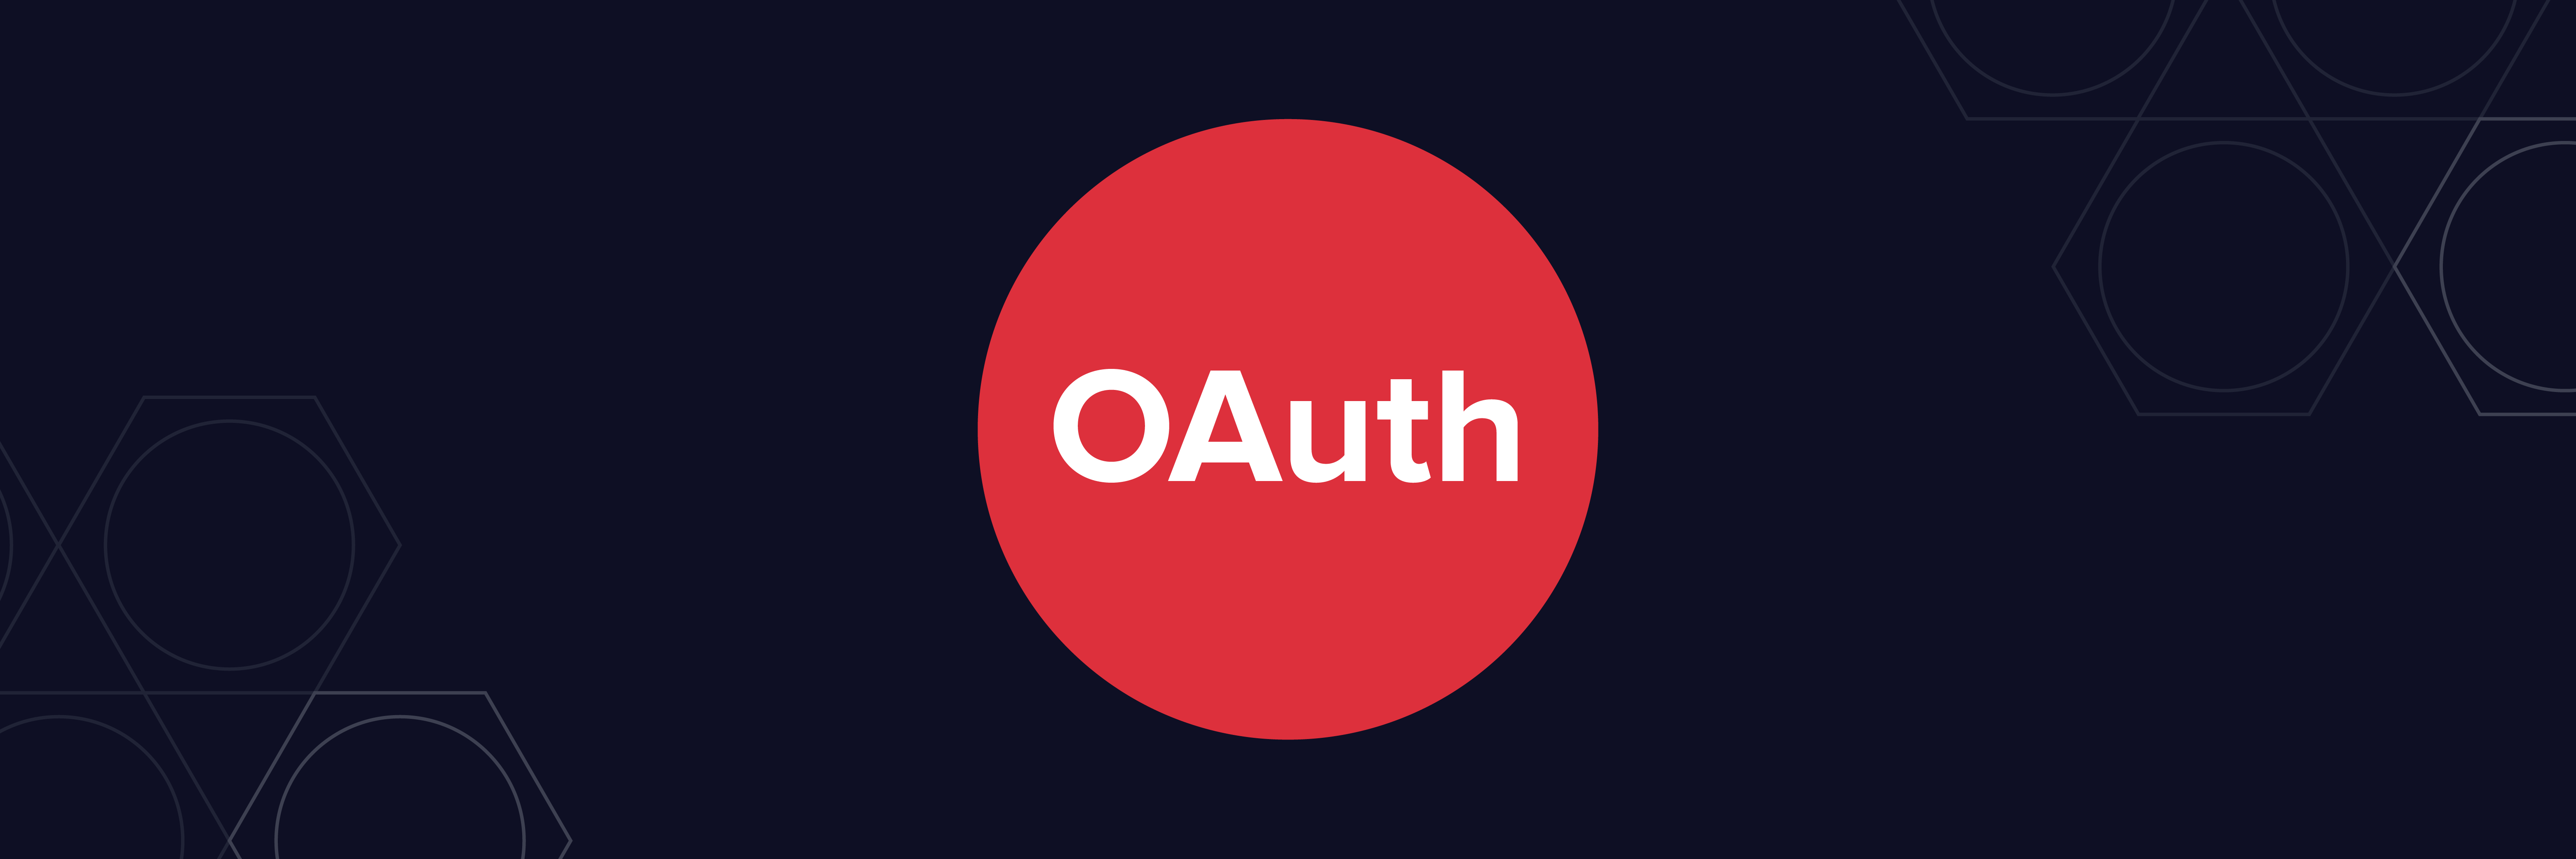 Oauth, source: https://www.varonis.com/blog/what-is-oauth